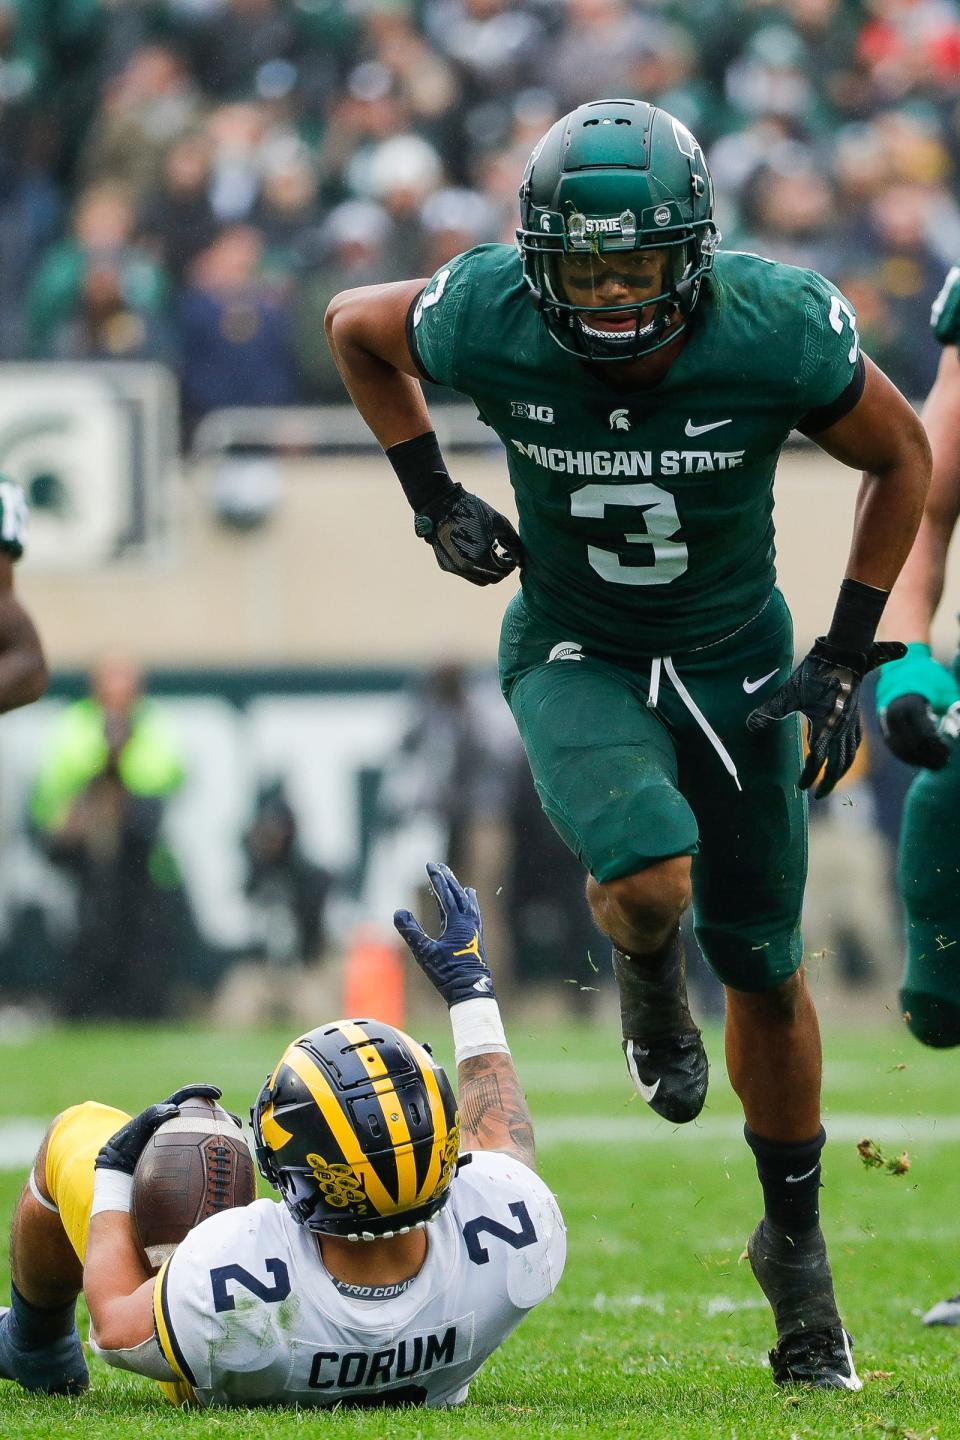 Michigan State safety Xavier Henderson celebrates a tackle against Michigan running back Blake Corum during the second half at Spartan Stadium in East Lansing on Saturday, Oct. 30, 2021.